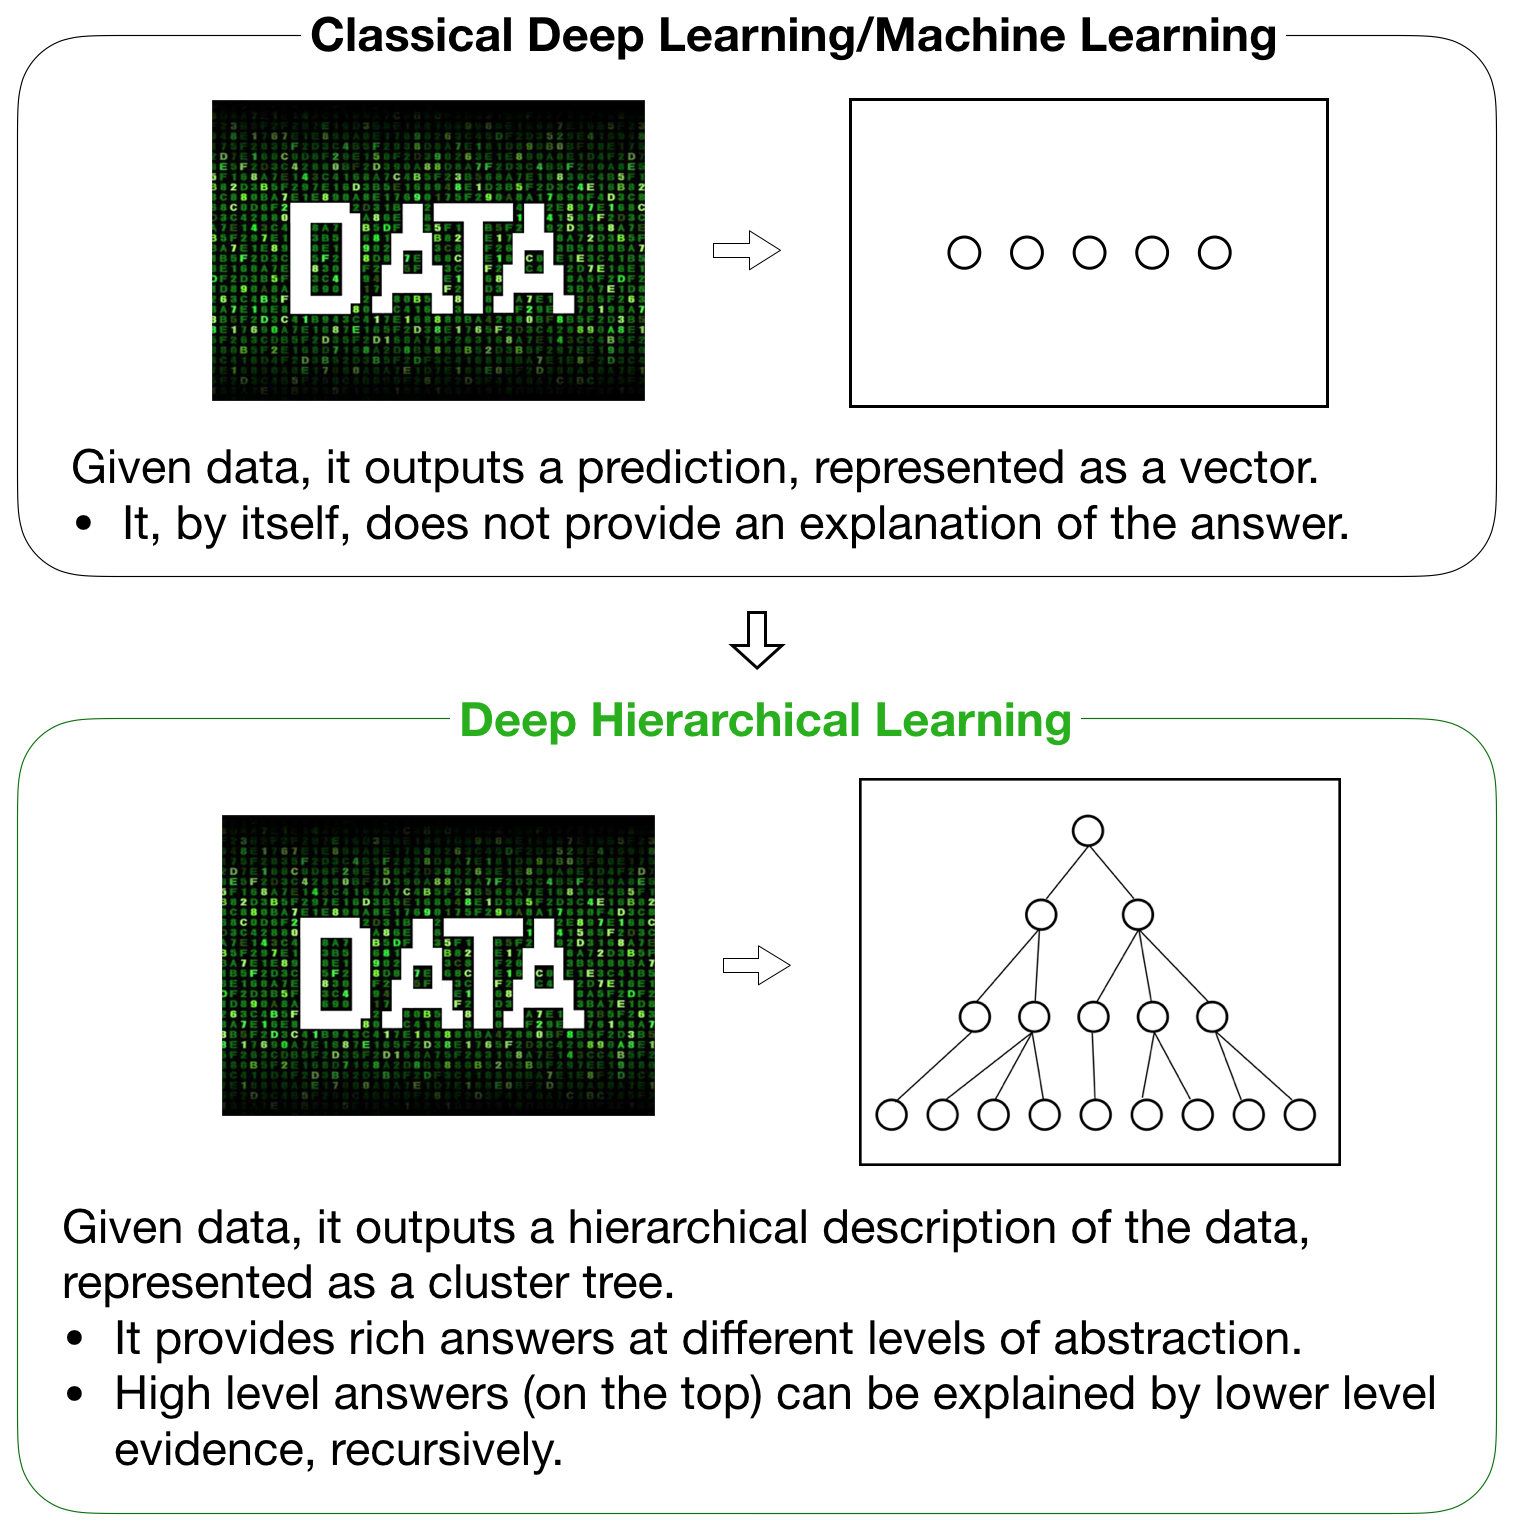 Classical Deep Learning/Machine Learning: Given data, it outputs a prediction, represented as a vector.
It, by itself, does not provide an explanation of the answer. Deep Hierarchical Learning: Given data, it outputs a hierarchical description of the data, represented as a tree. 1) It provides rich answers at different levels of abstraction. 2) High level answers (on the top) can be explained by lower level evidence, recursively.